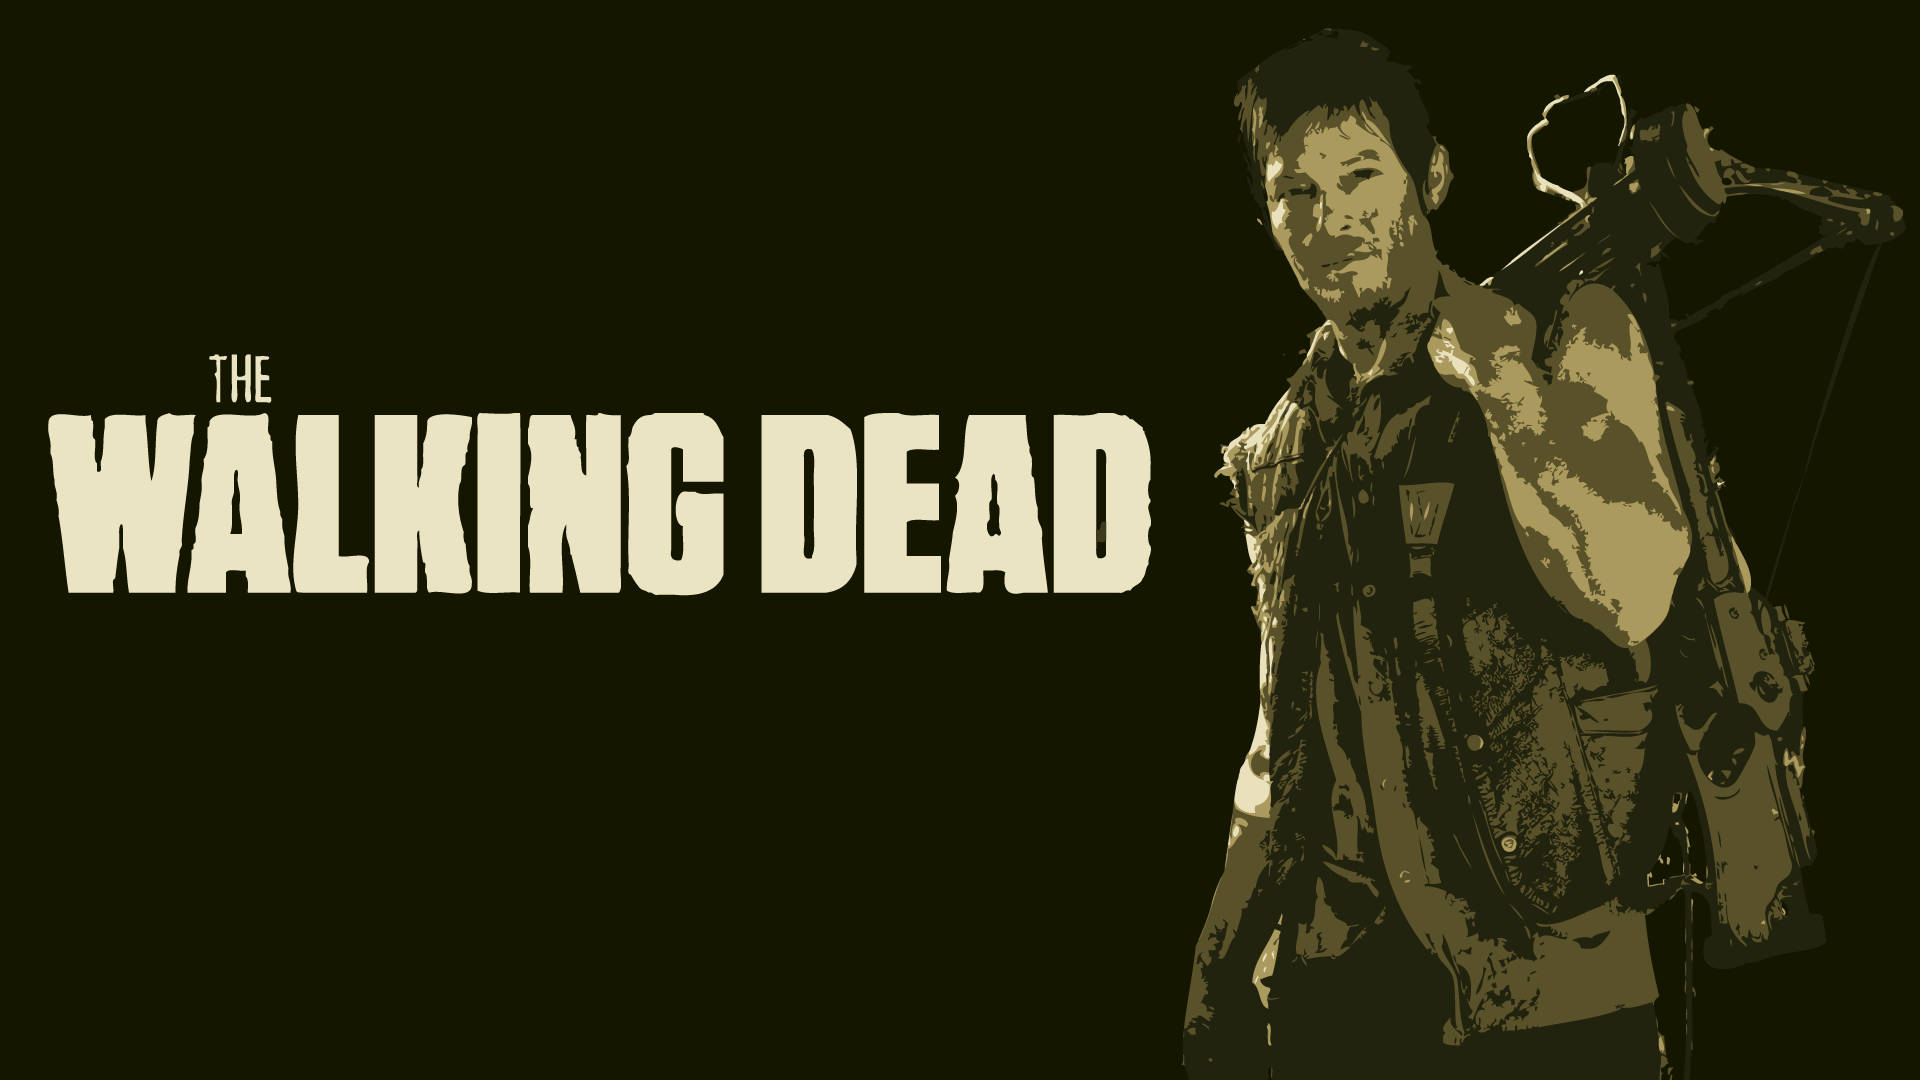 Daryl Dixon of the hit television show The Walking Dead Wallpaper